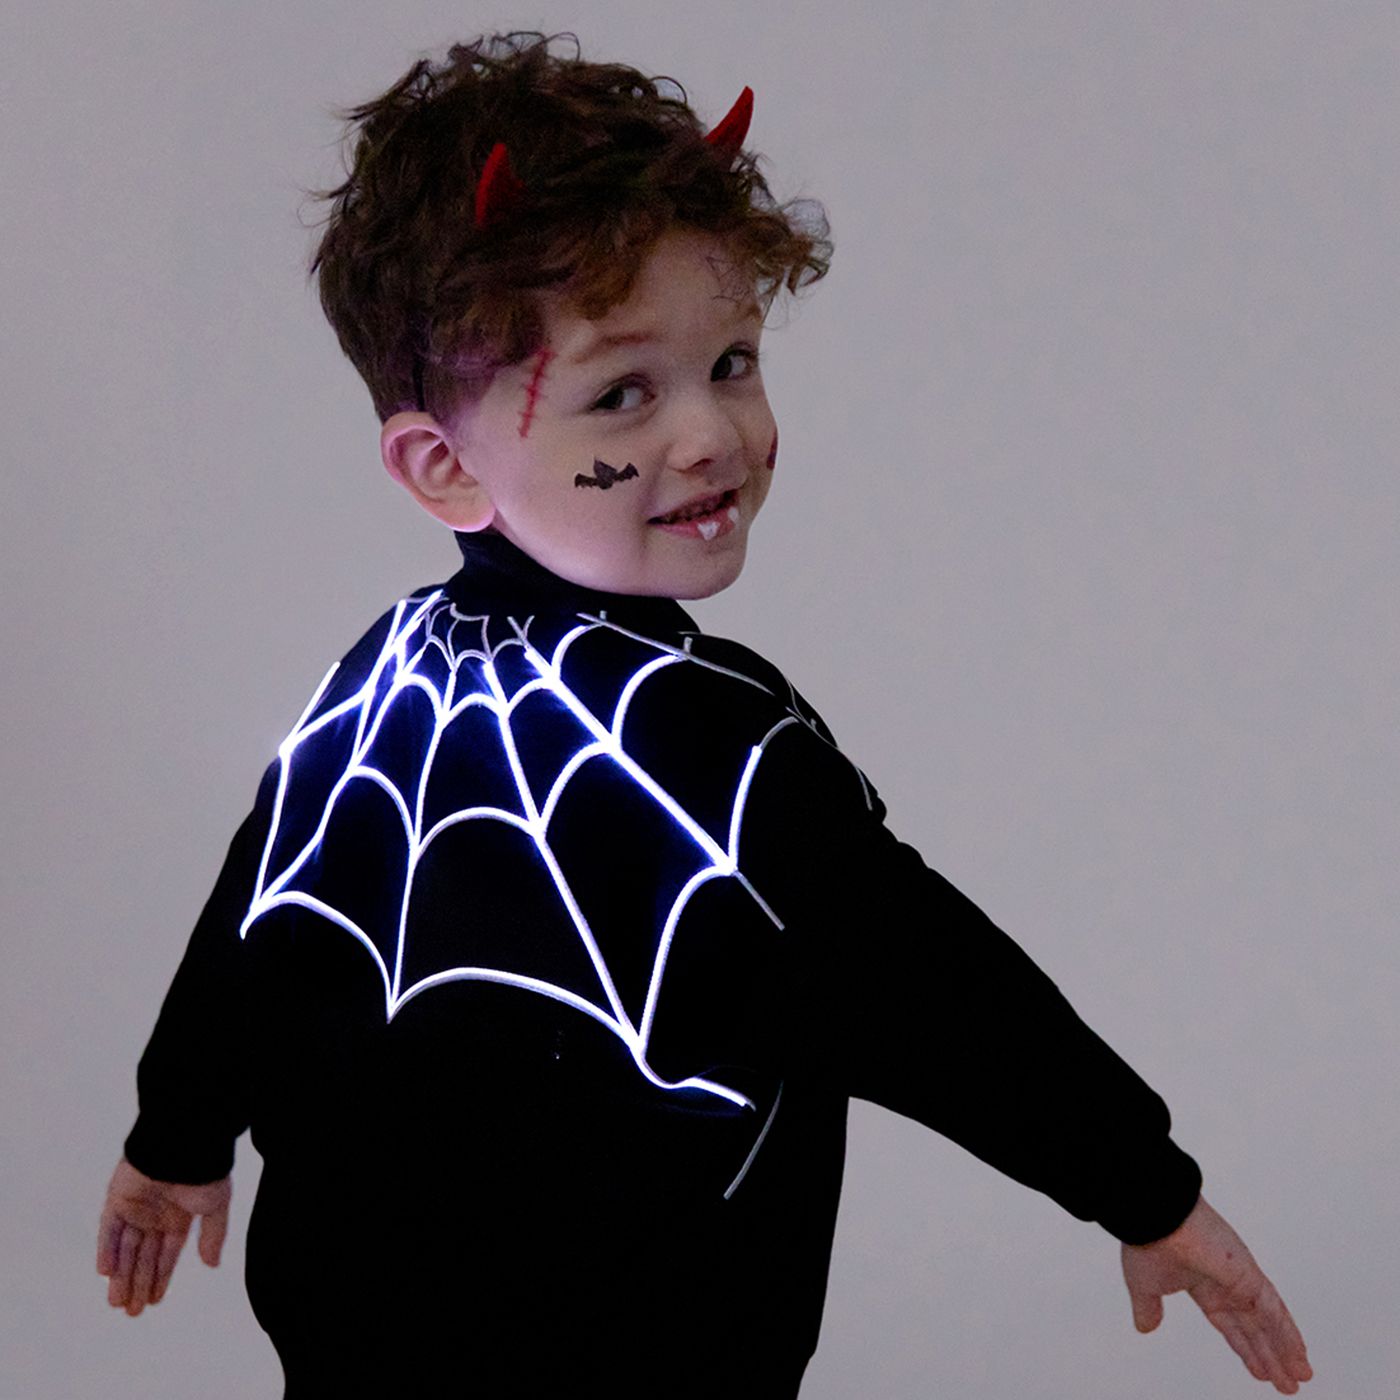 Go-Glow Illuminating Jacket with Light Up Embroidered Spider Web Including Controller (Built-In Batt